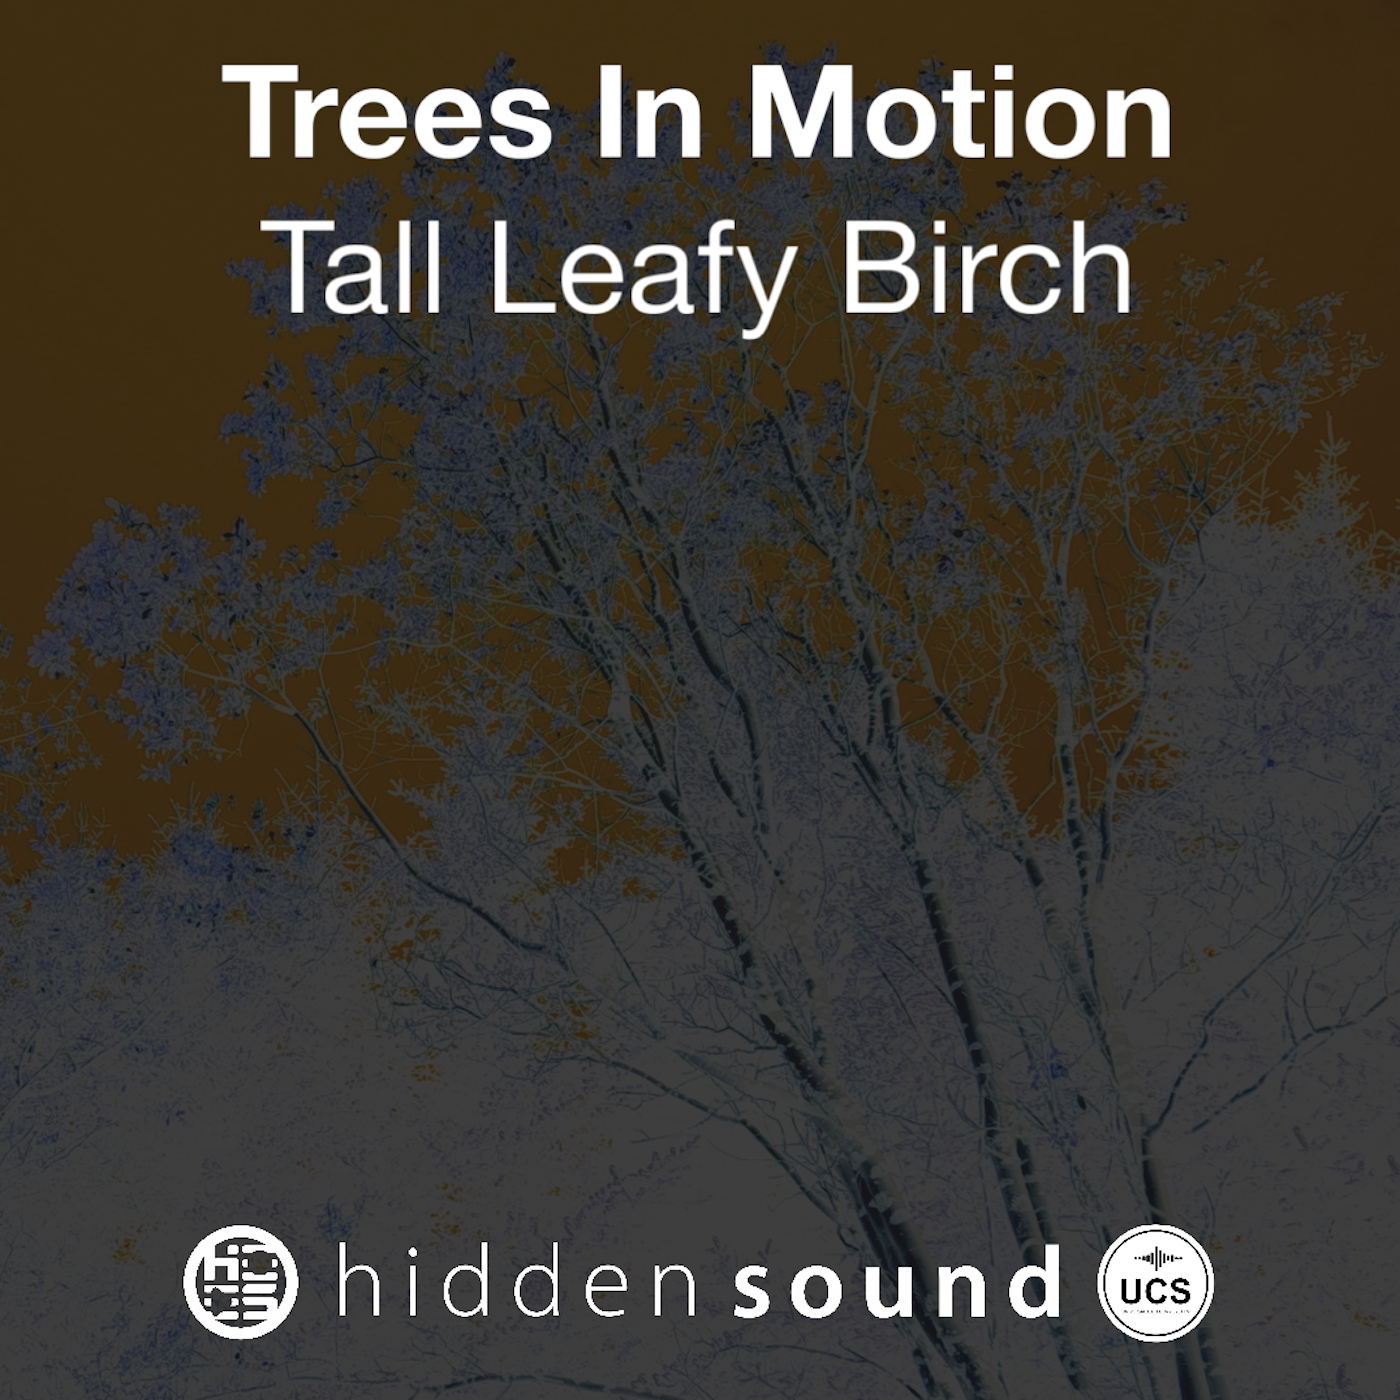 Trees In Motion: Tall Leafy Birch